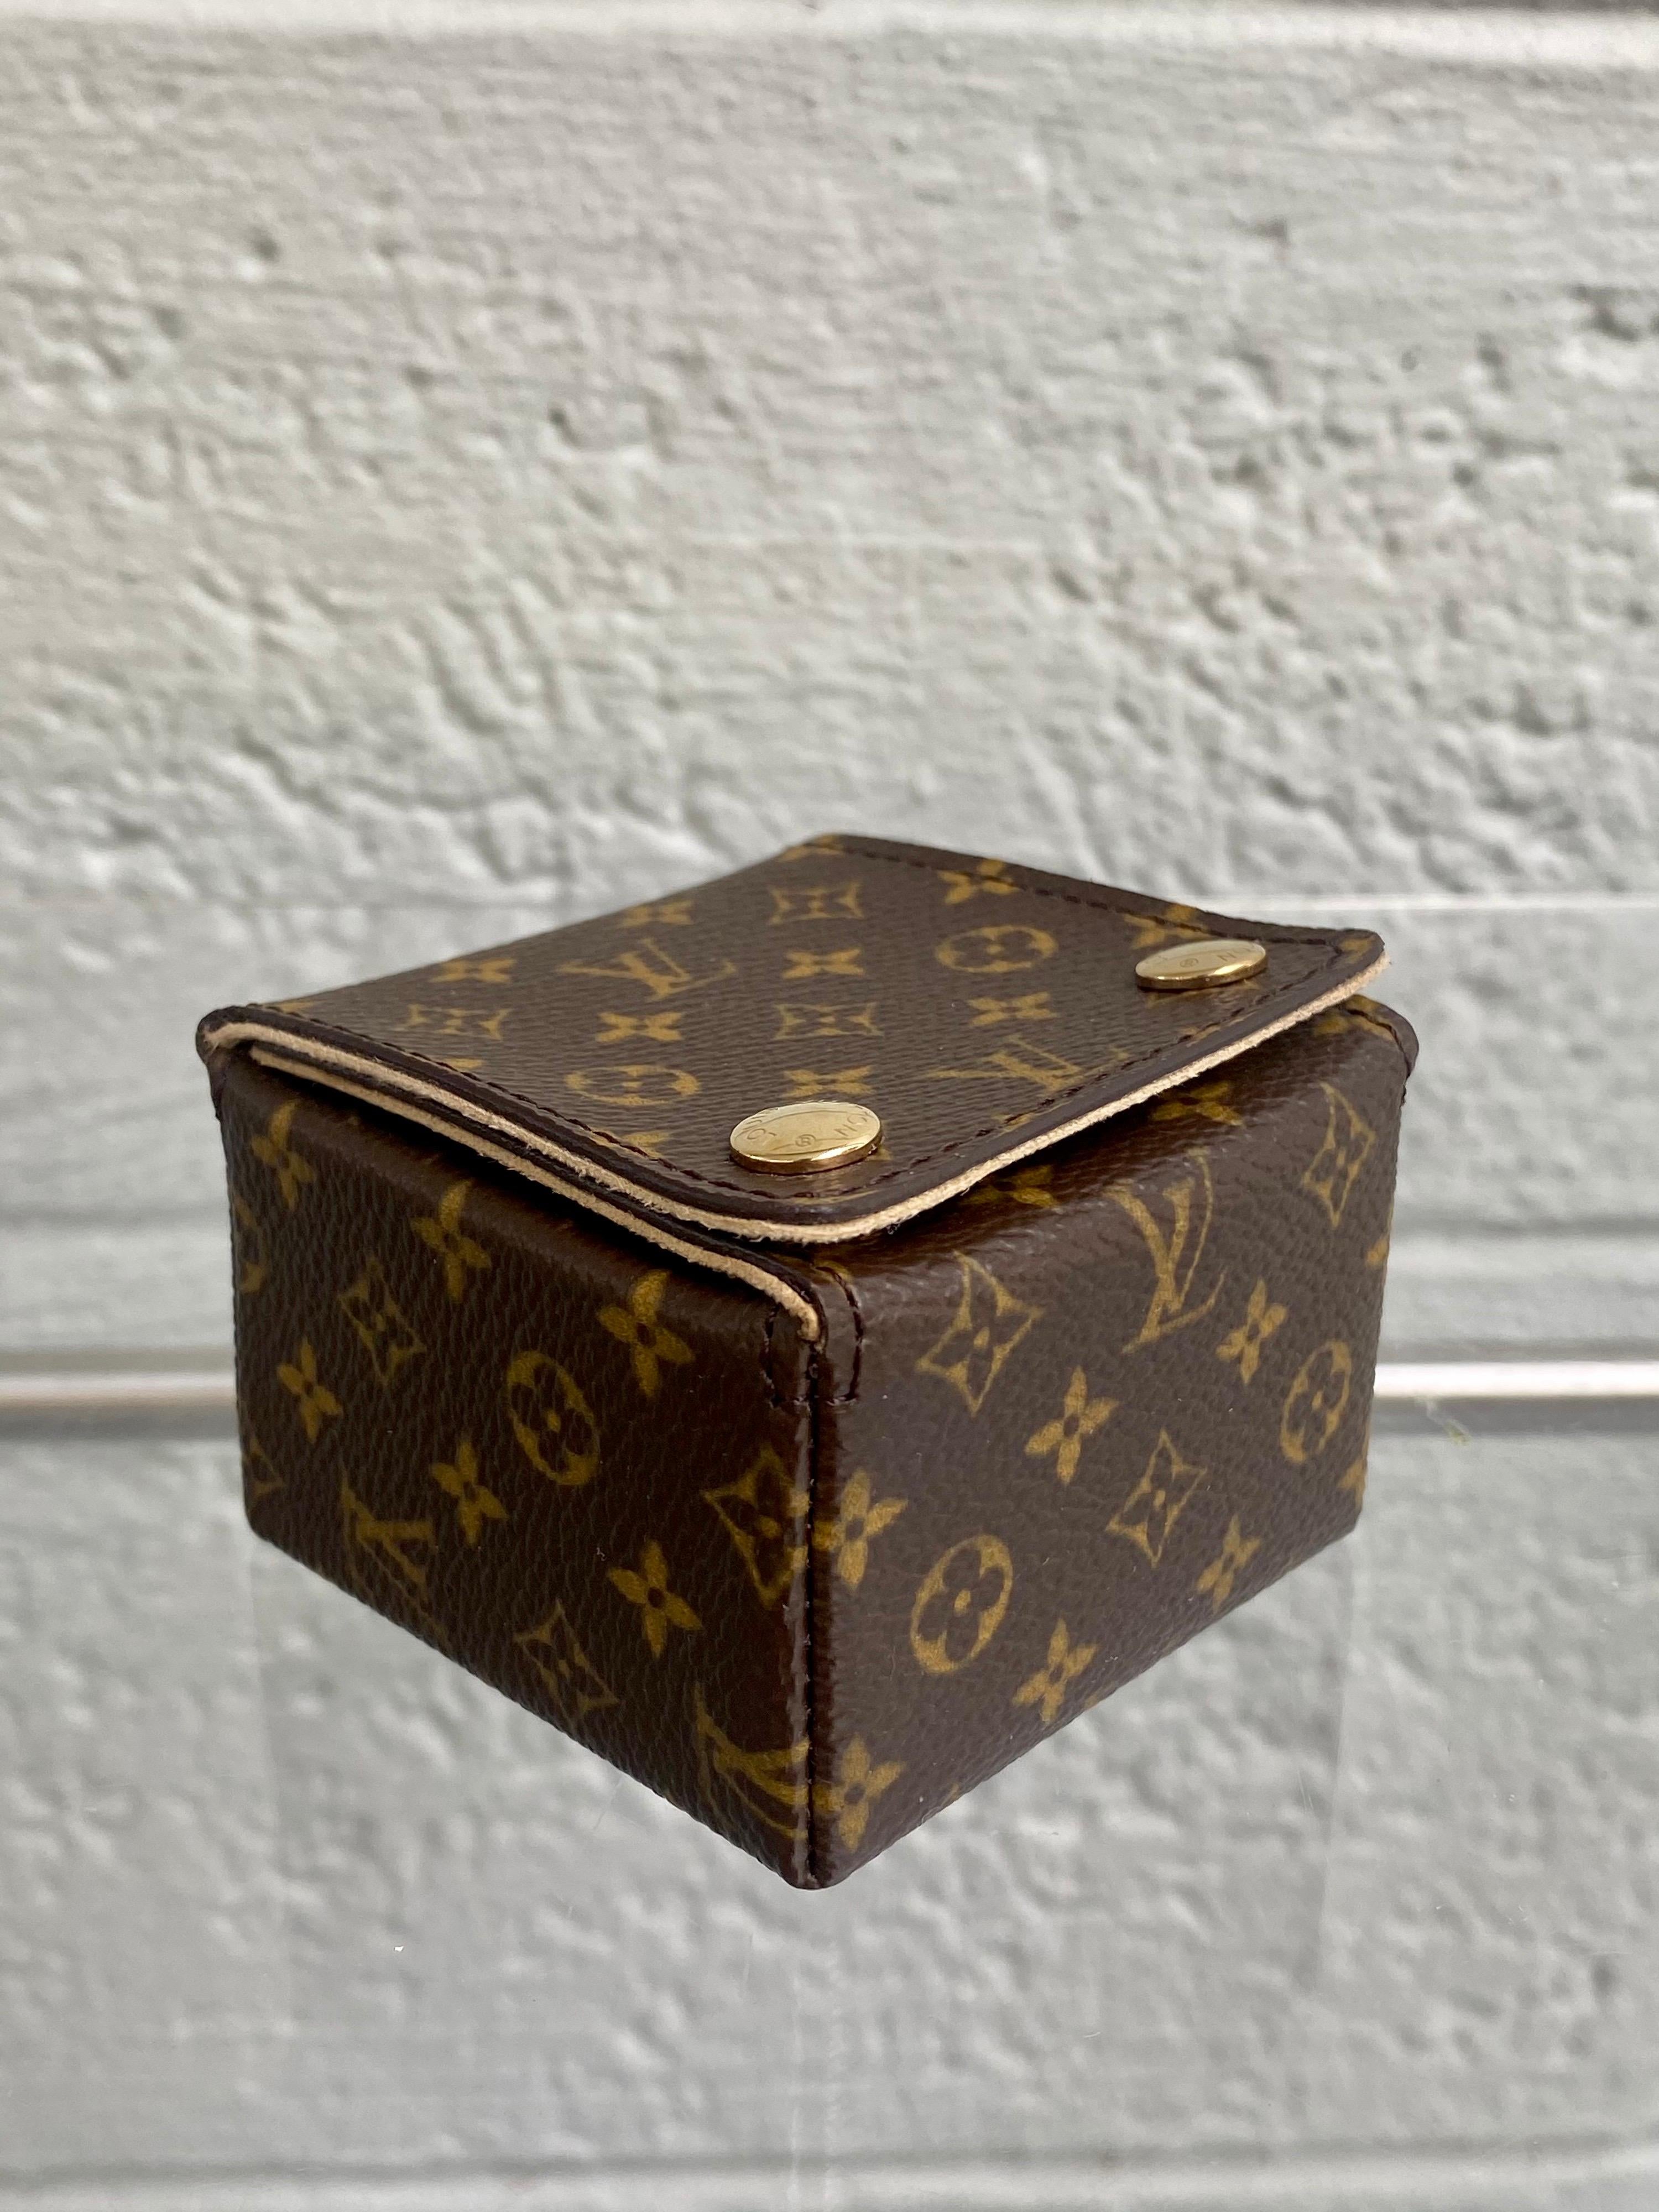 An exceptional case for romantic gifts. Classic Monogram designed for declarations of true love. Ideal for an engagement ring or other jewelry, this exquisite case proves that sometimes the container is as precious as what is inside.